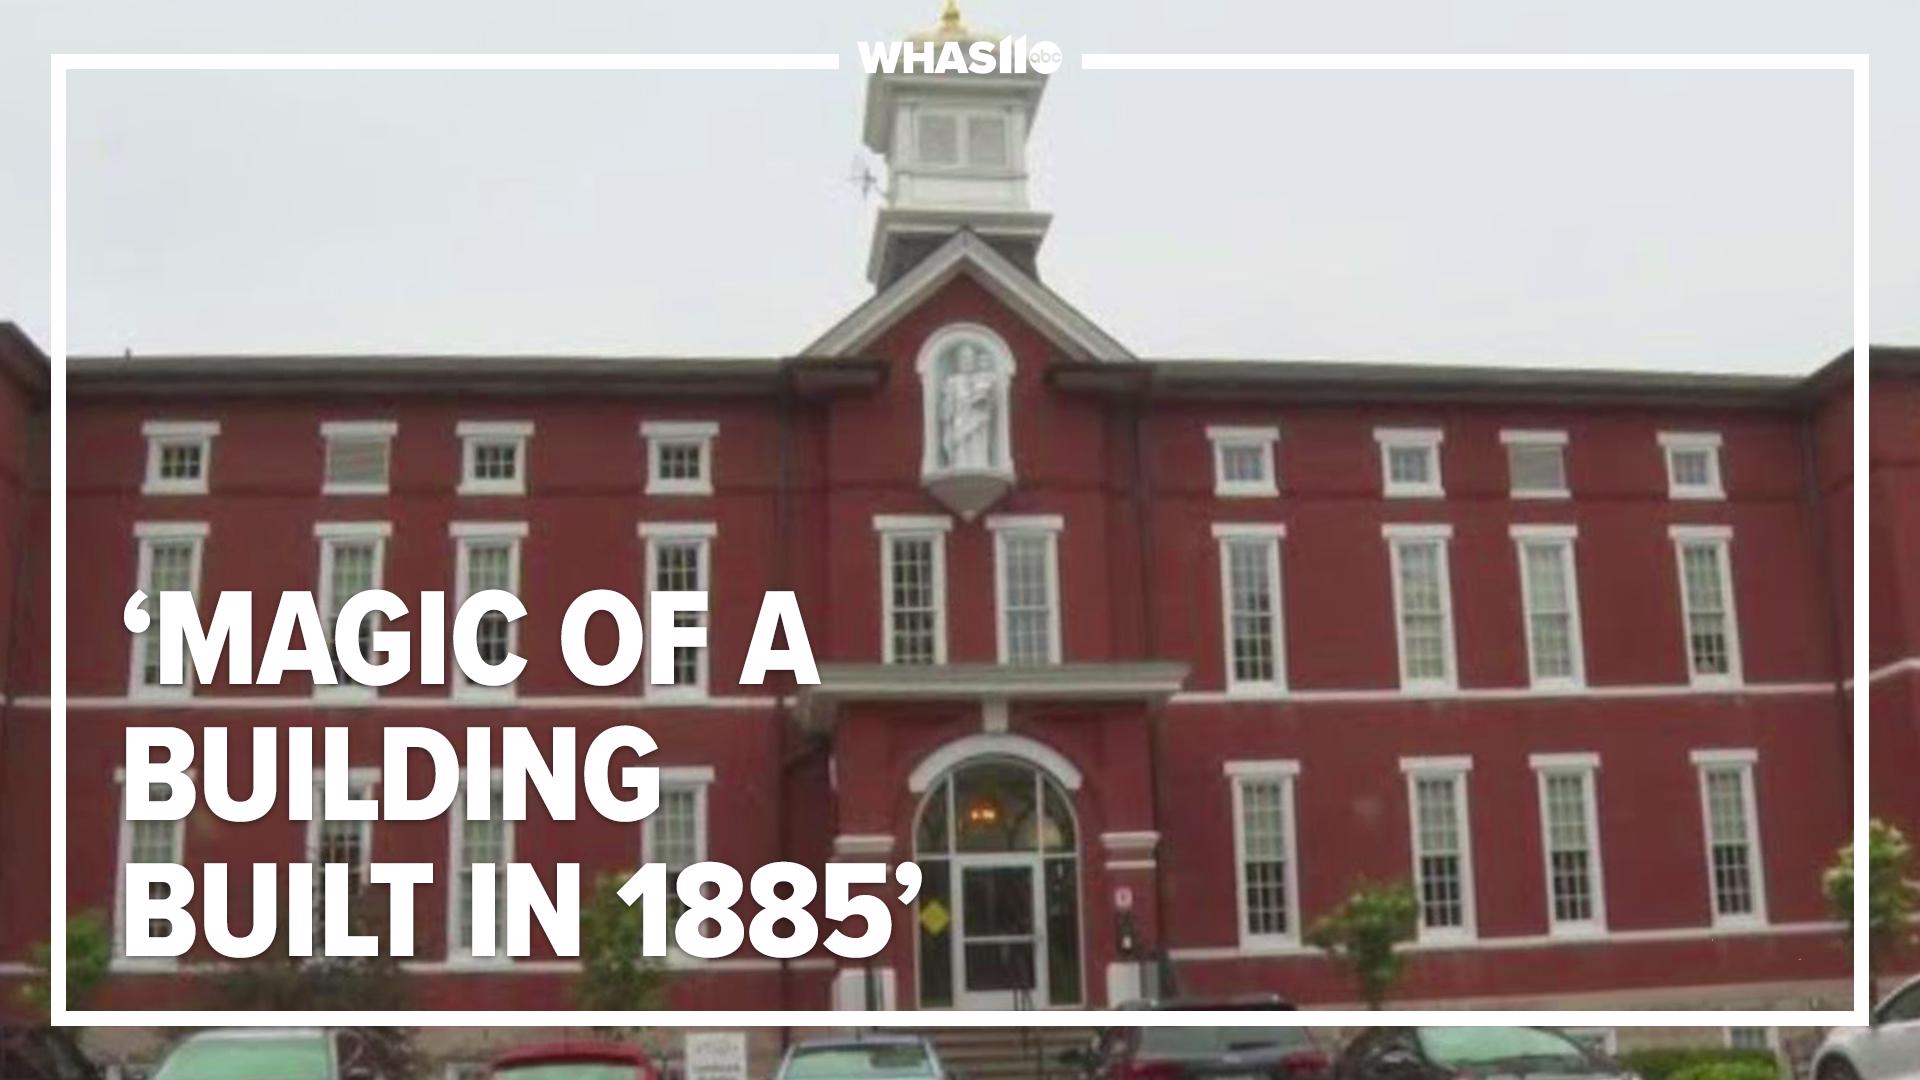 The children’s home will be showing off its newly renovated landmark building to the public.